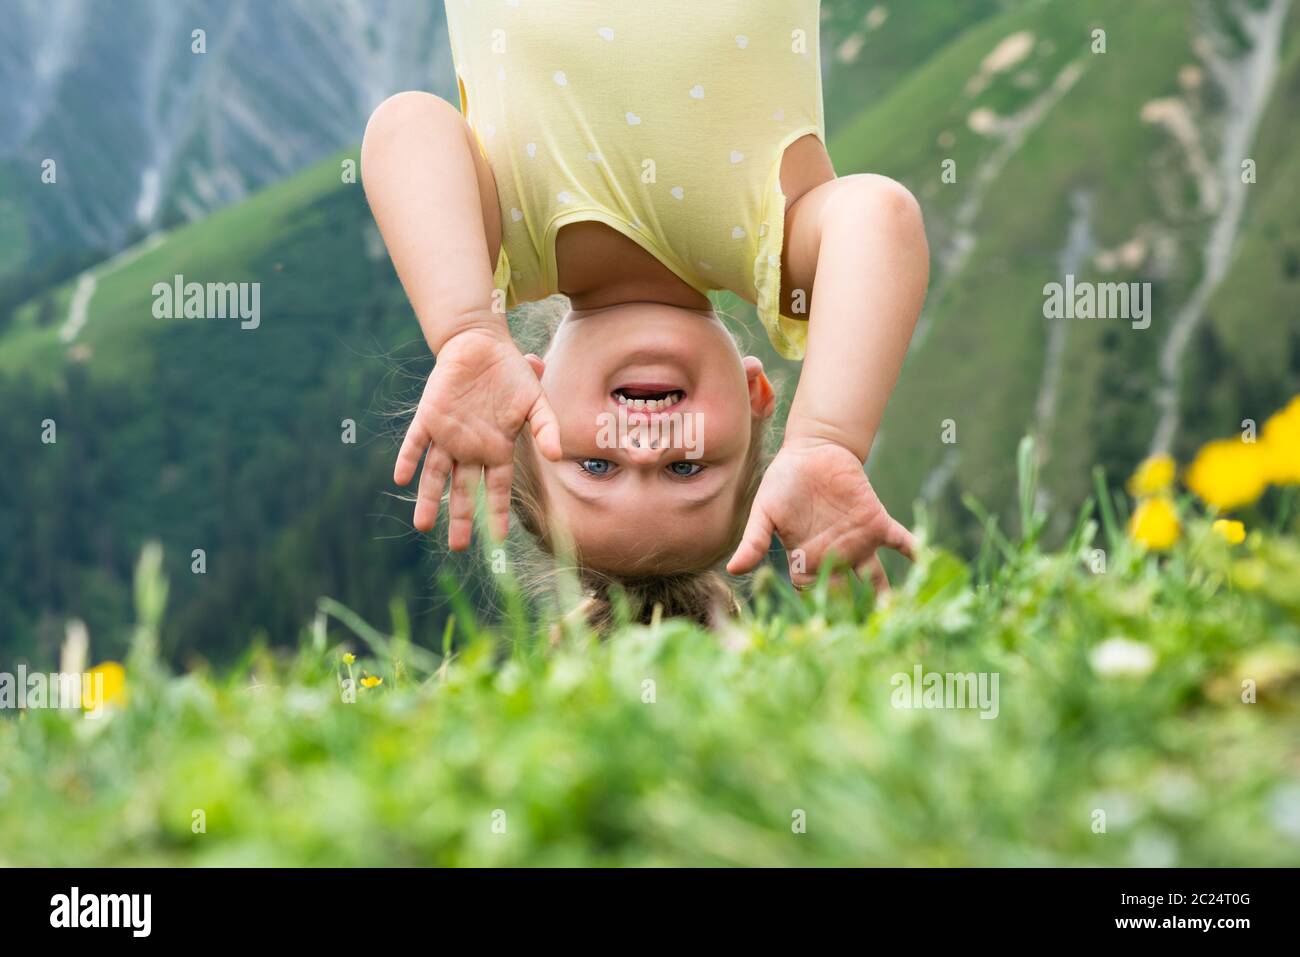 Little Girl Hanging Upside Down In Mountains Stock Photo